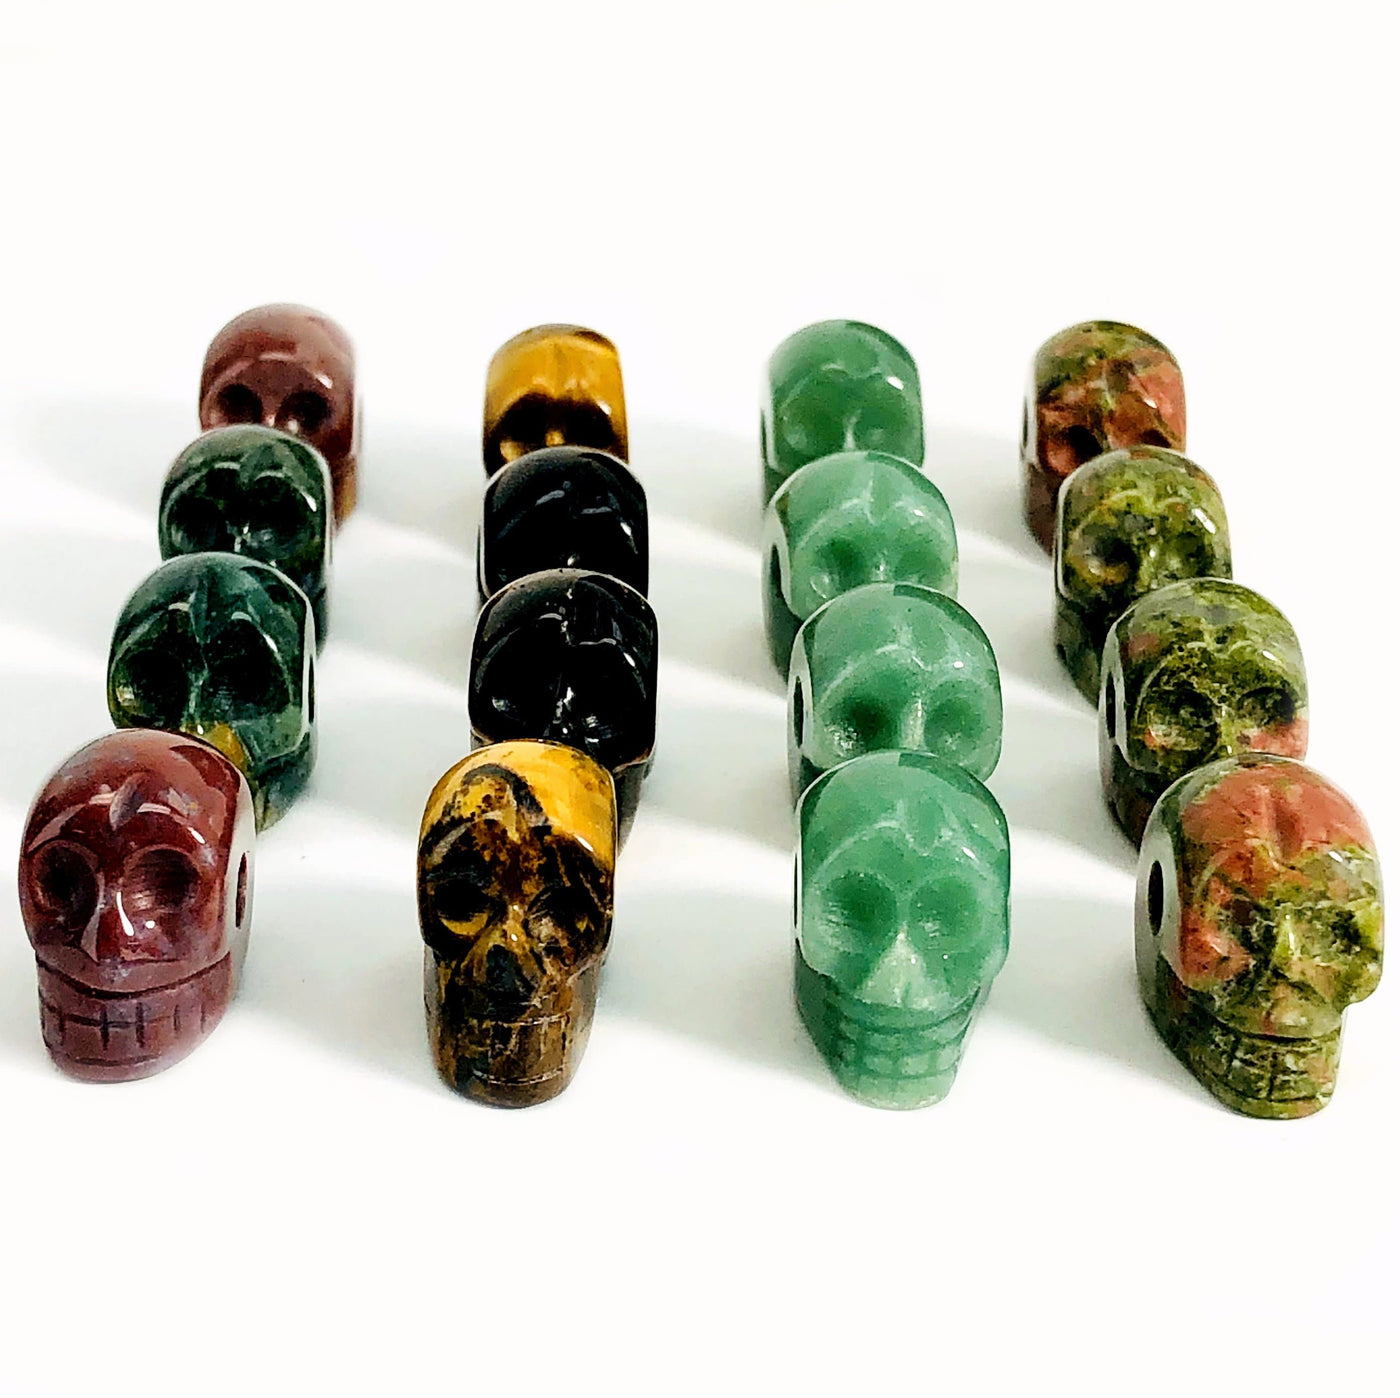 bloodstone, tigers eye, aventurine, and unakite skull beads in rows on white background